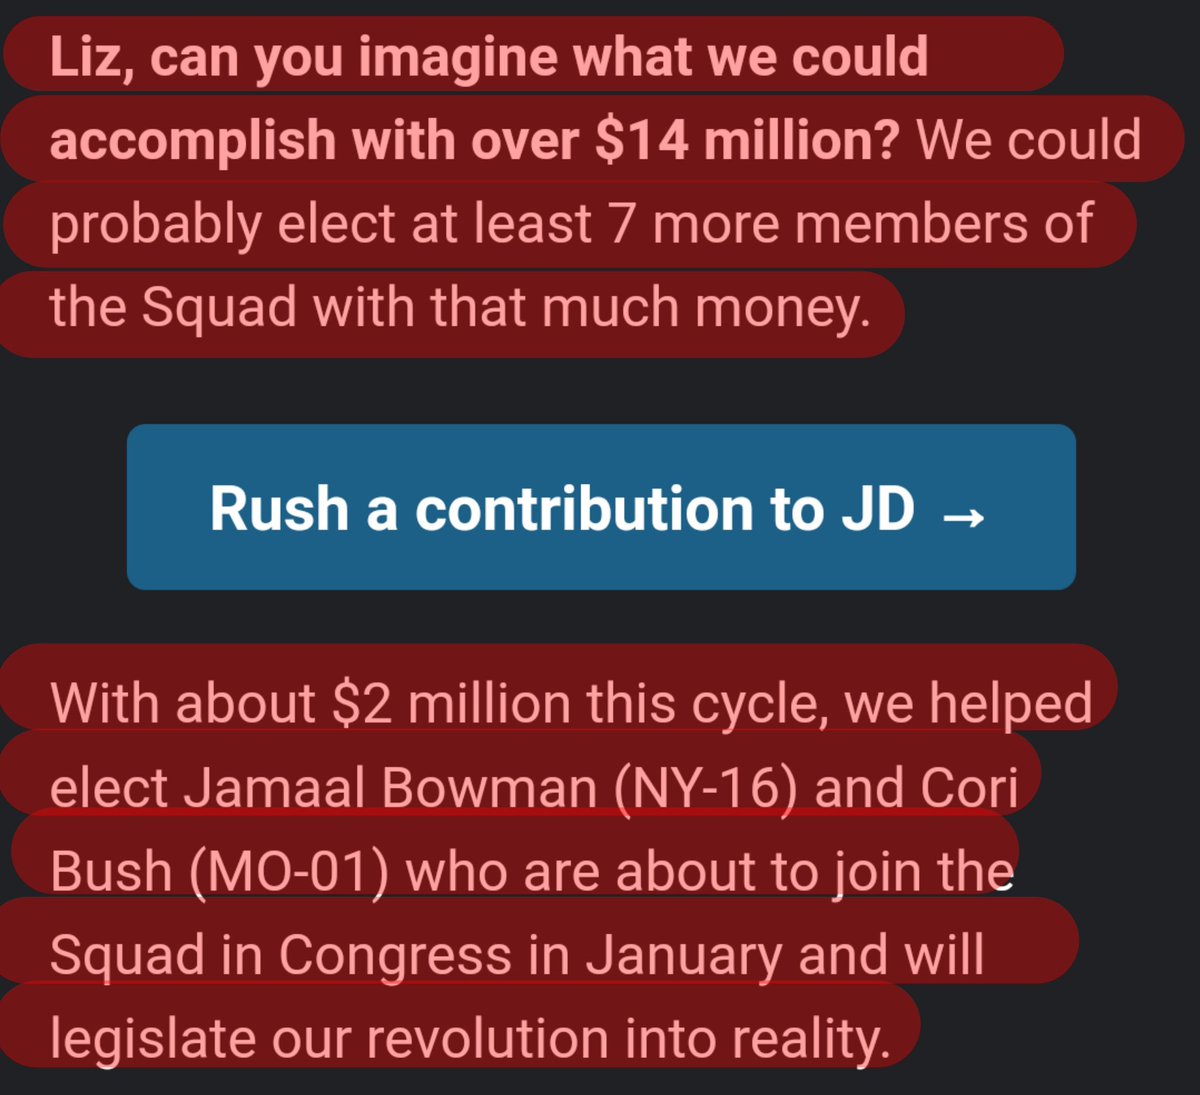 Ok moving on...They opine about how they could elect 7 new Squad members with that $14M!! As if that $ should have been theirs for some reason.But since it took AOC >$14M to get re-elected in her D+29 district, I doubt that.